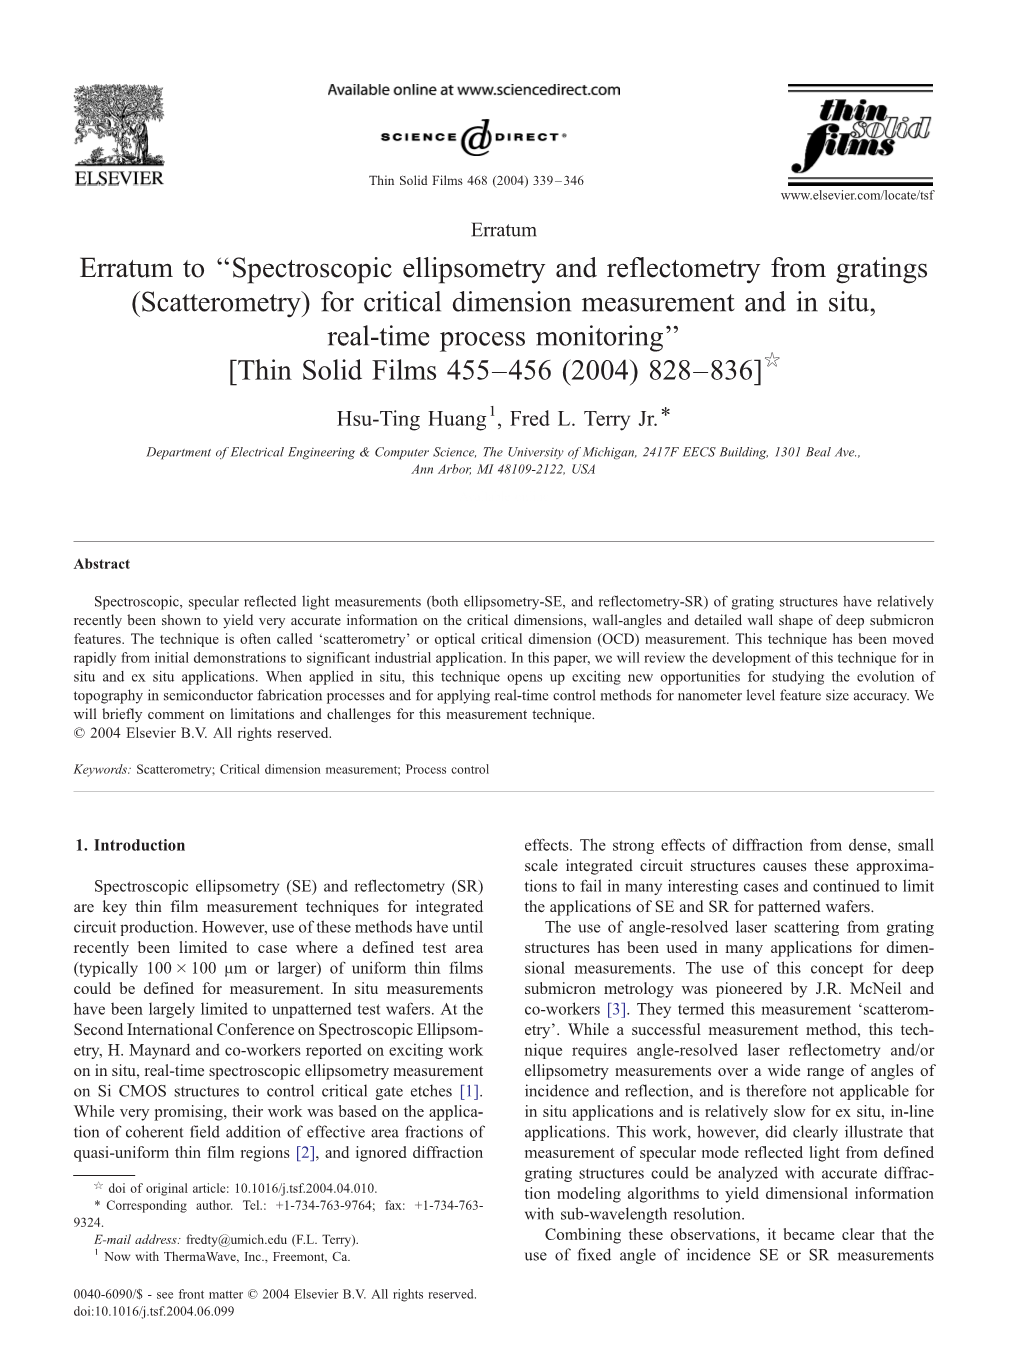 Erratum to ''Spectroscopic Ellipsometry and Reflectometry from Gratings